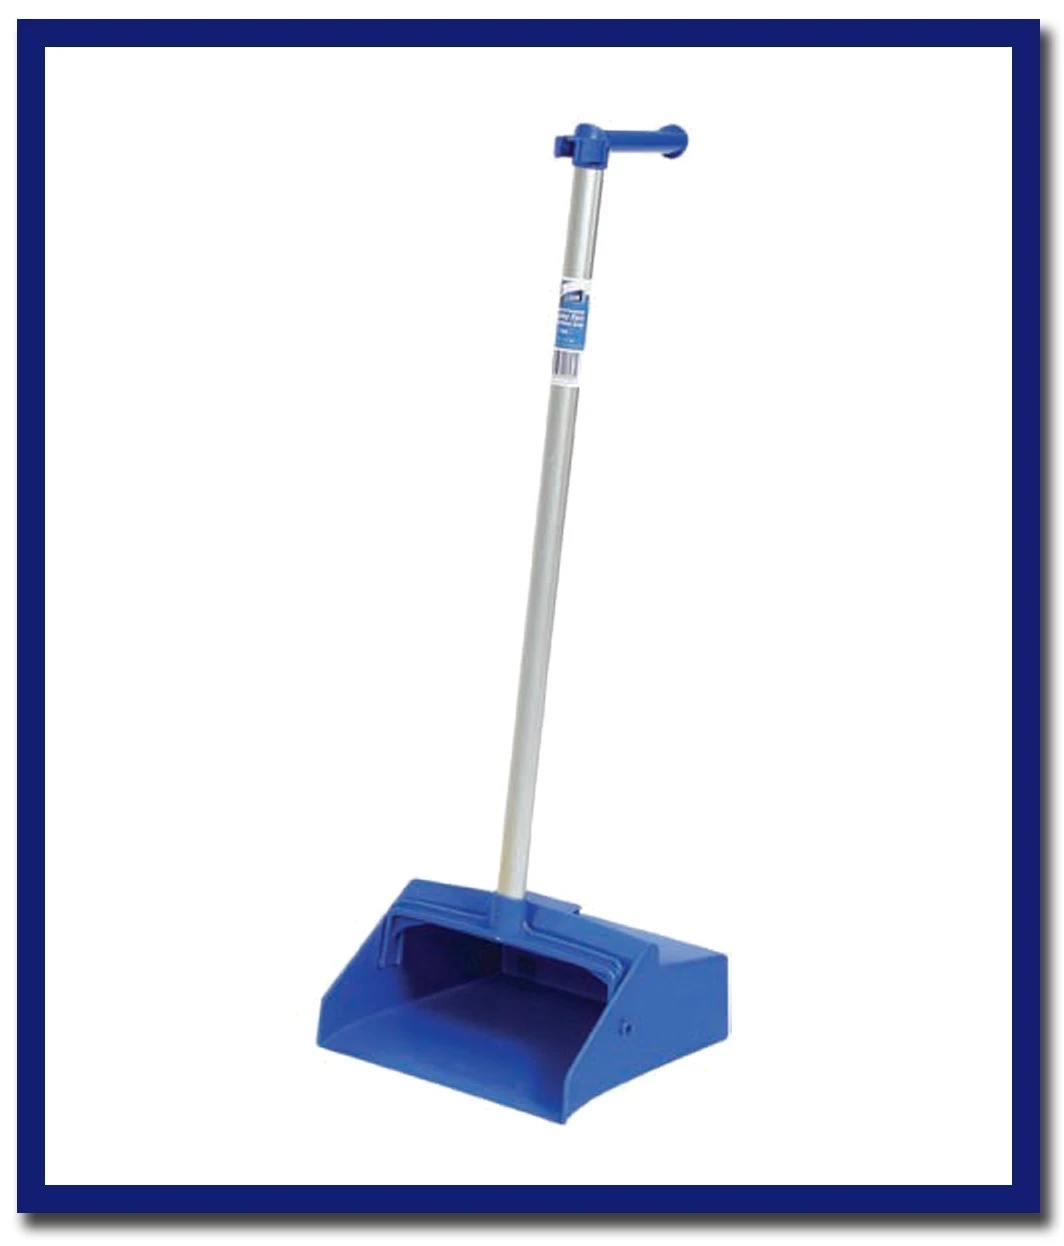 Edco General Purpose Lobby Pan With Pistol Grip - 1 Unit - Stone Doctor Australia - Cleaning Accessories> Janitorial > Lobby Pan